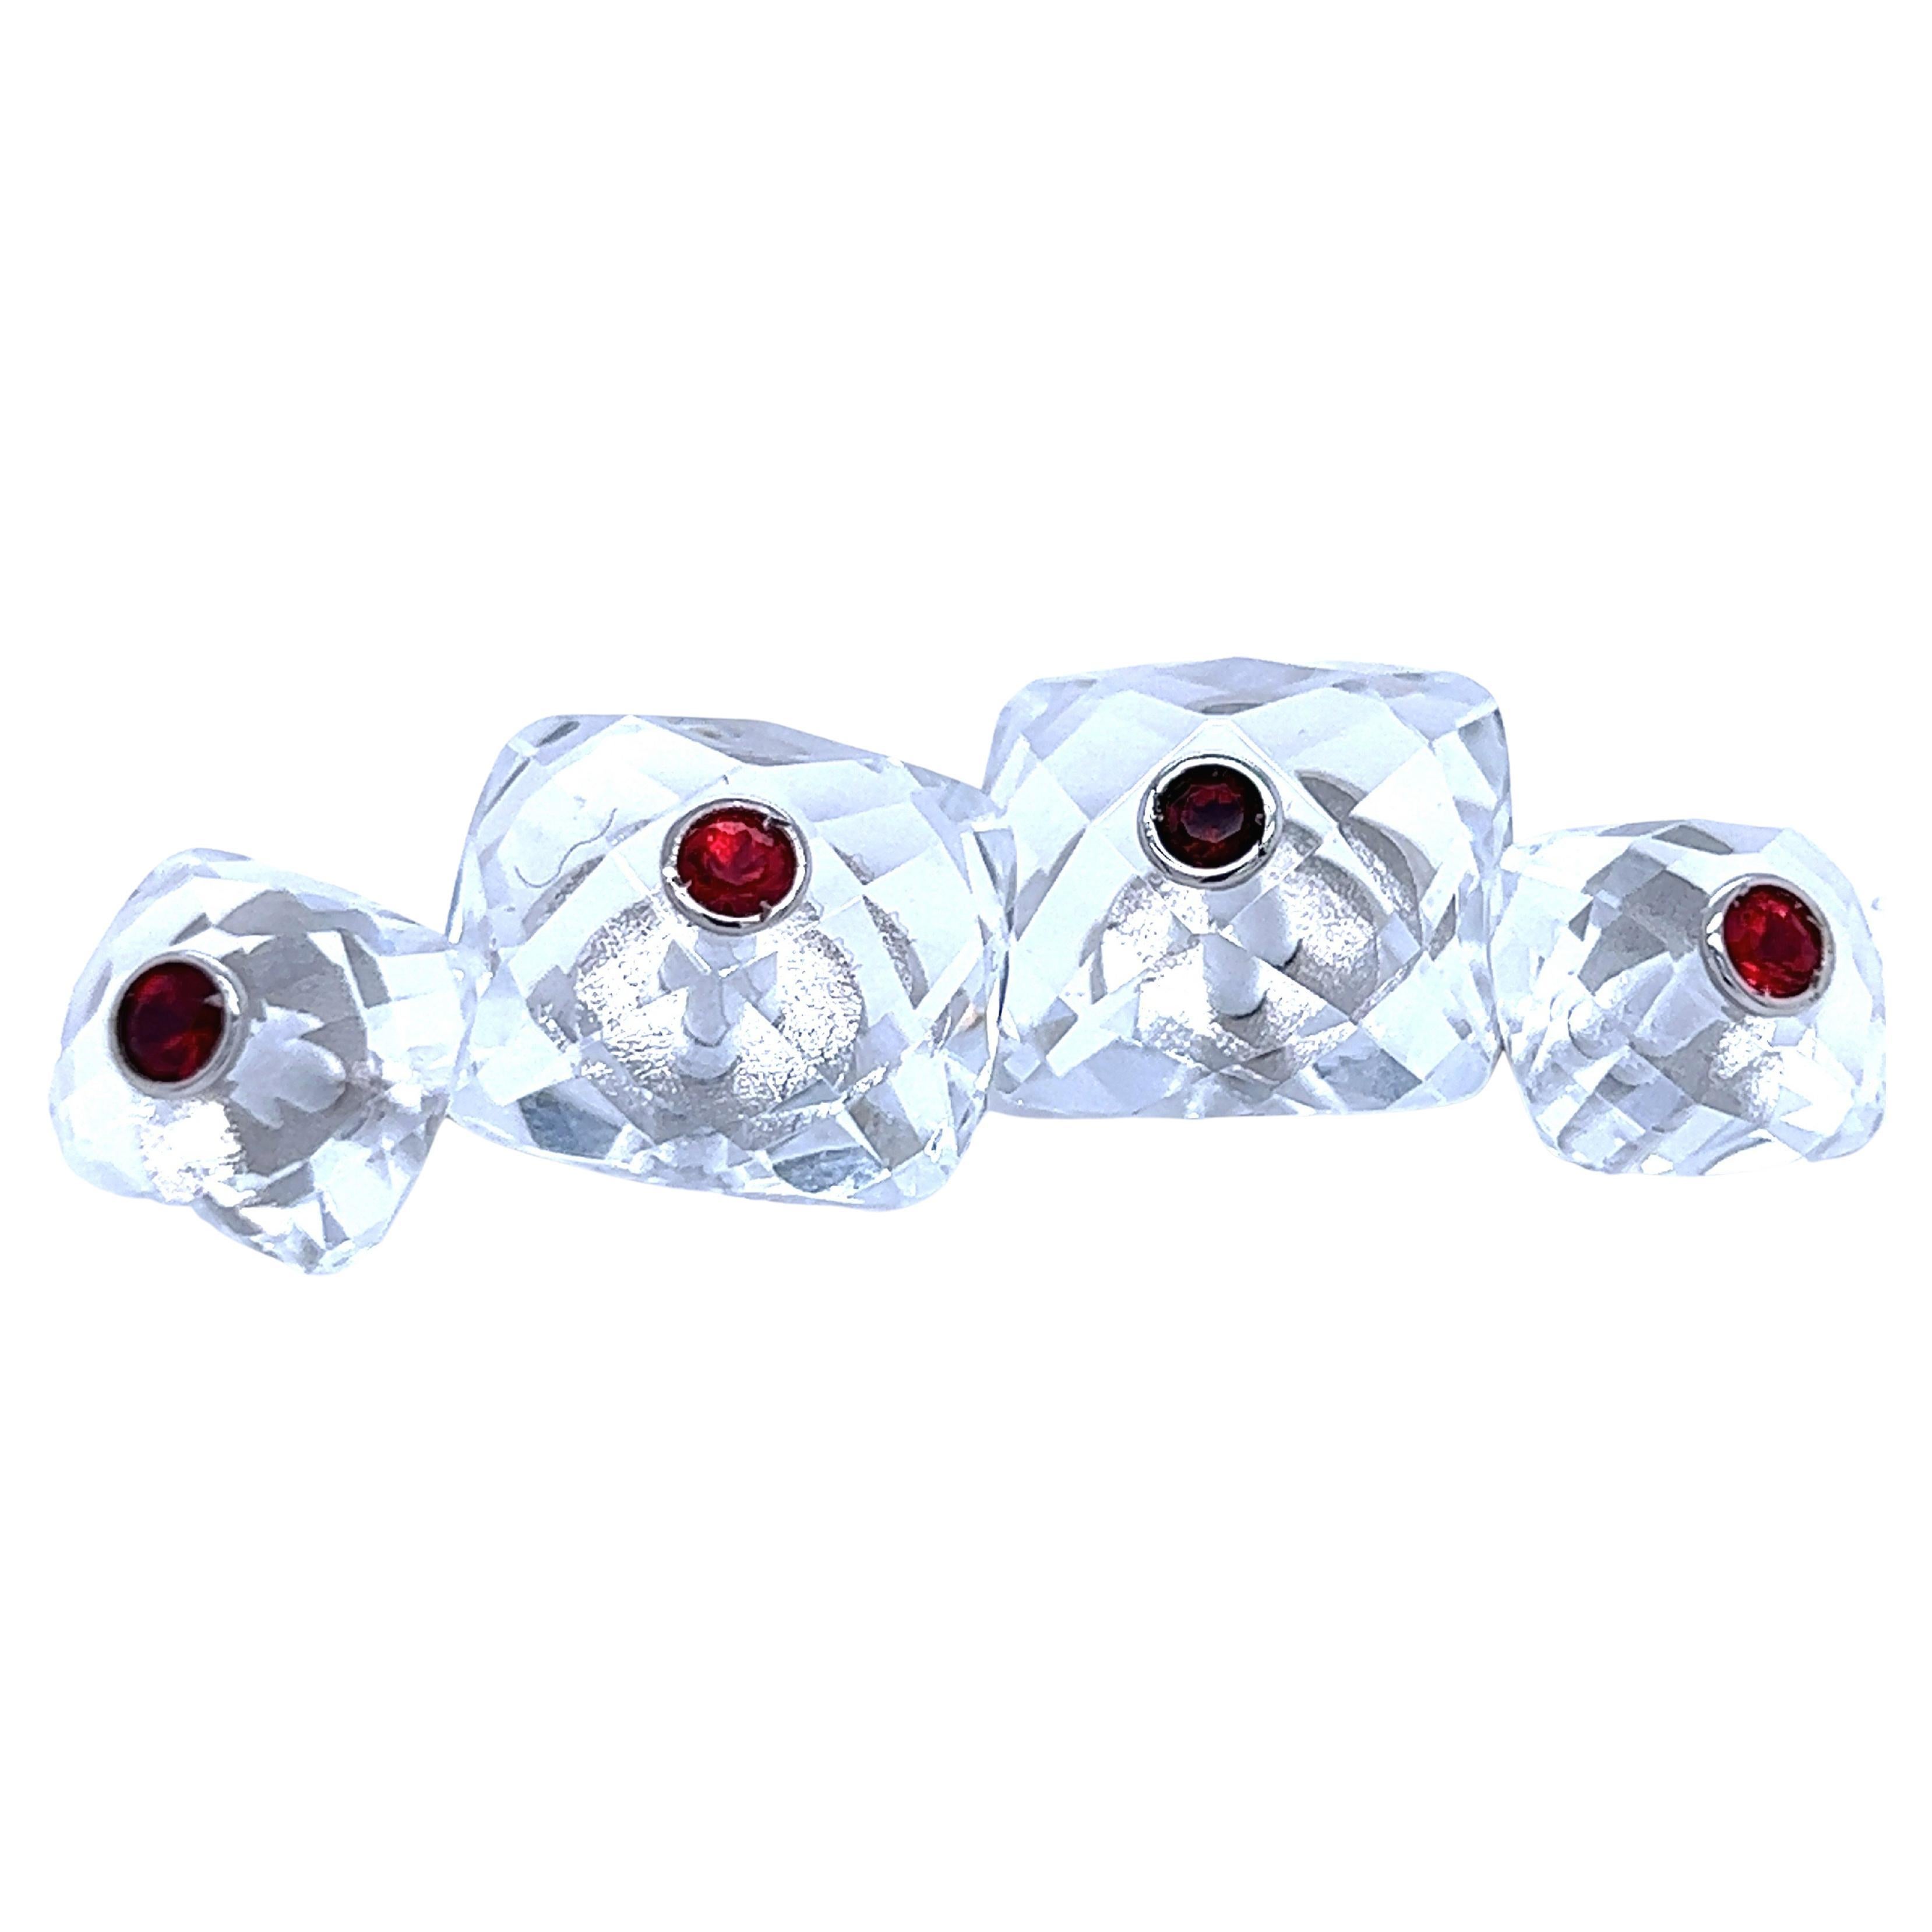 Berca Ruby Inlaid Faceted Rock Crystal Quartz Setting White Gold Cufflinks